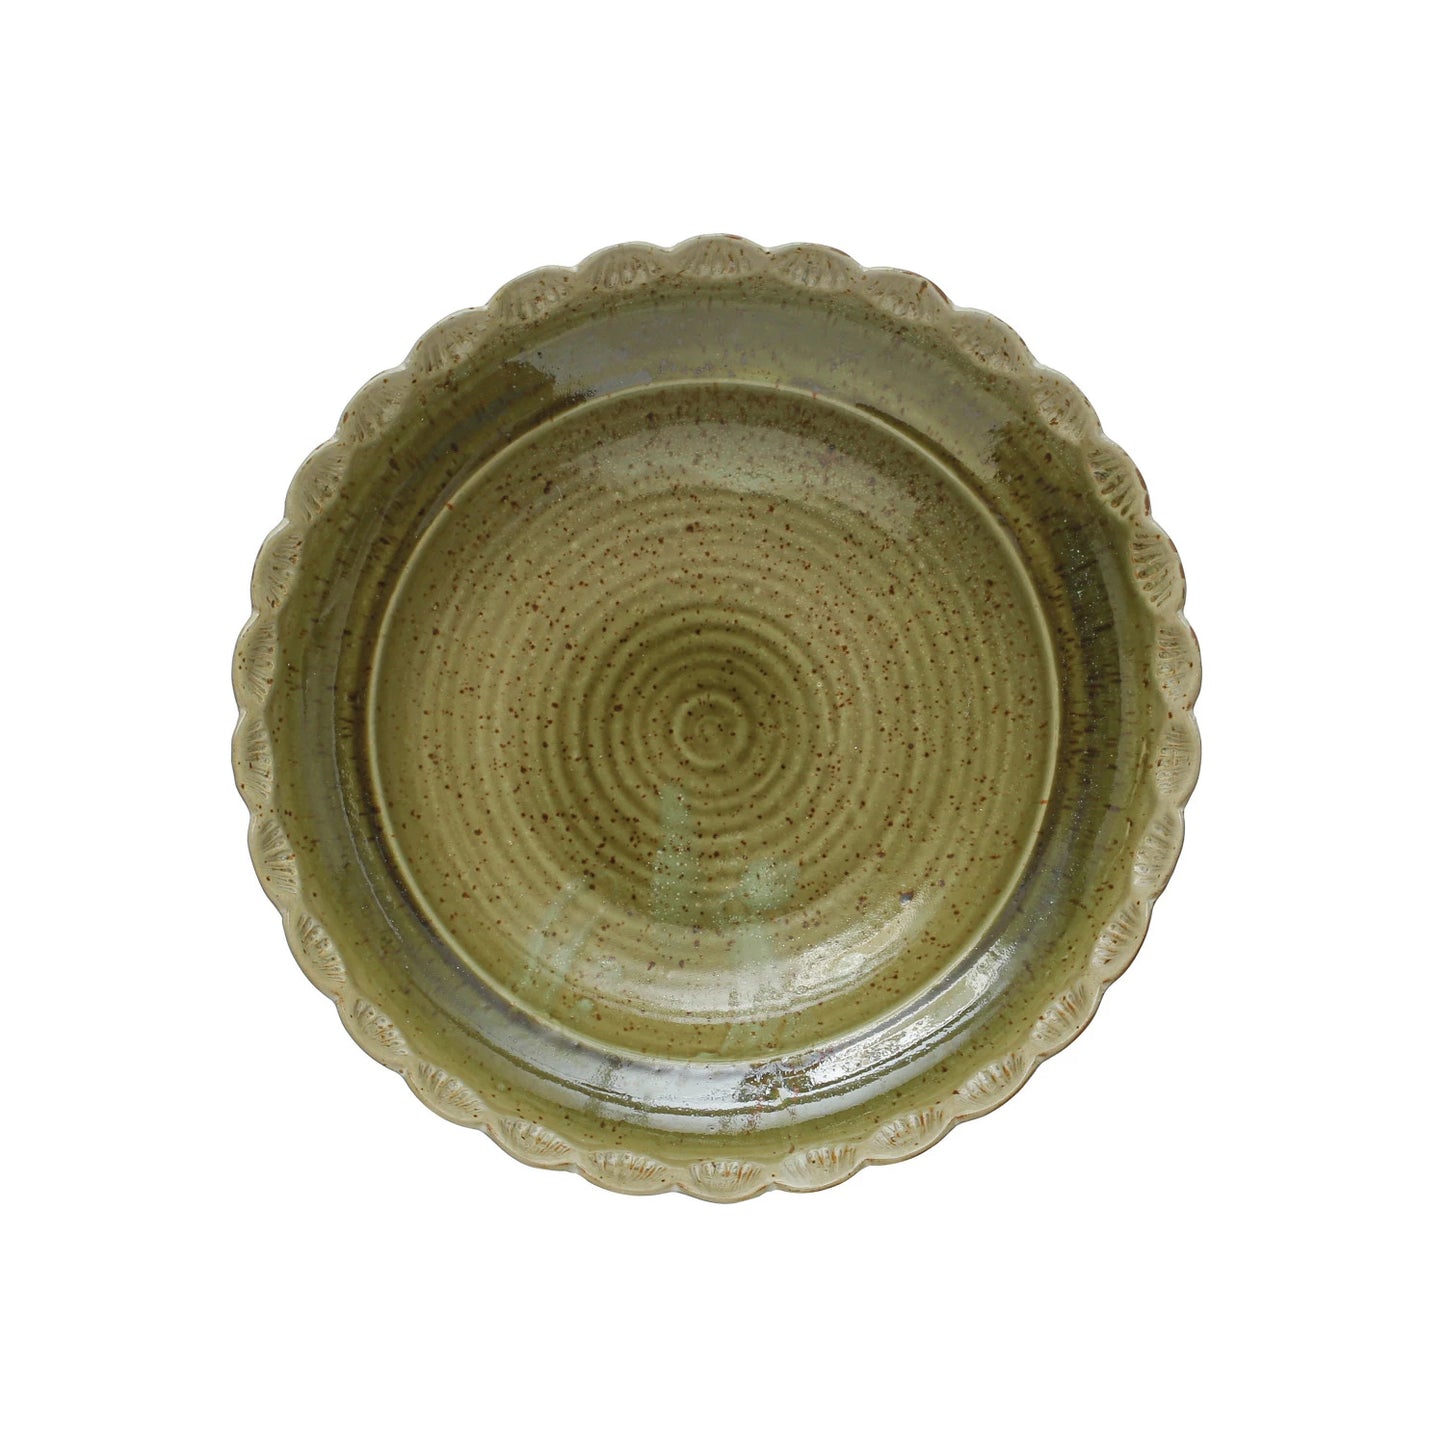 Stoneware Scalloped Bowl - Green Speckled